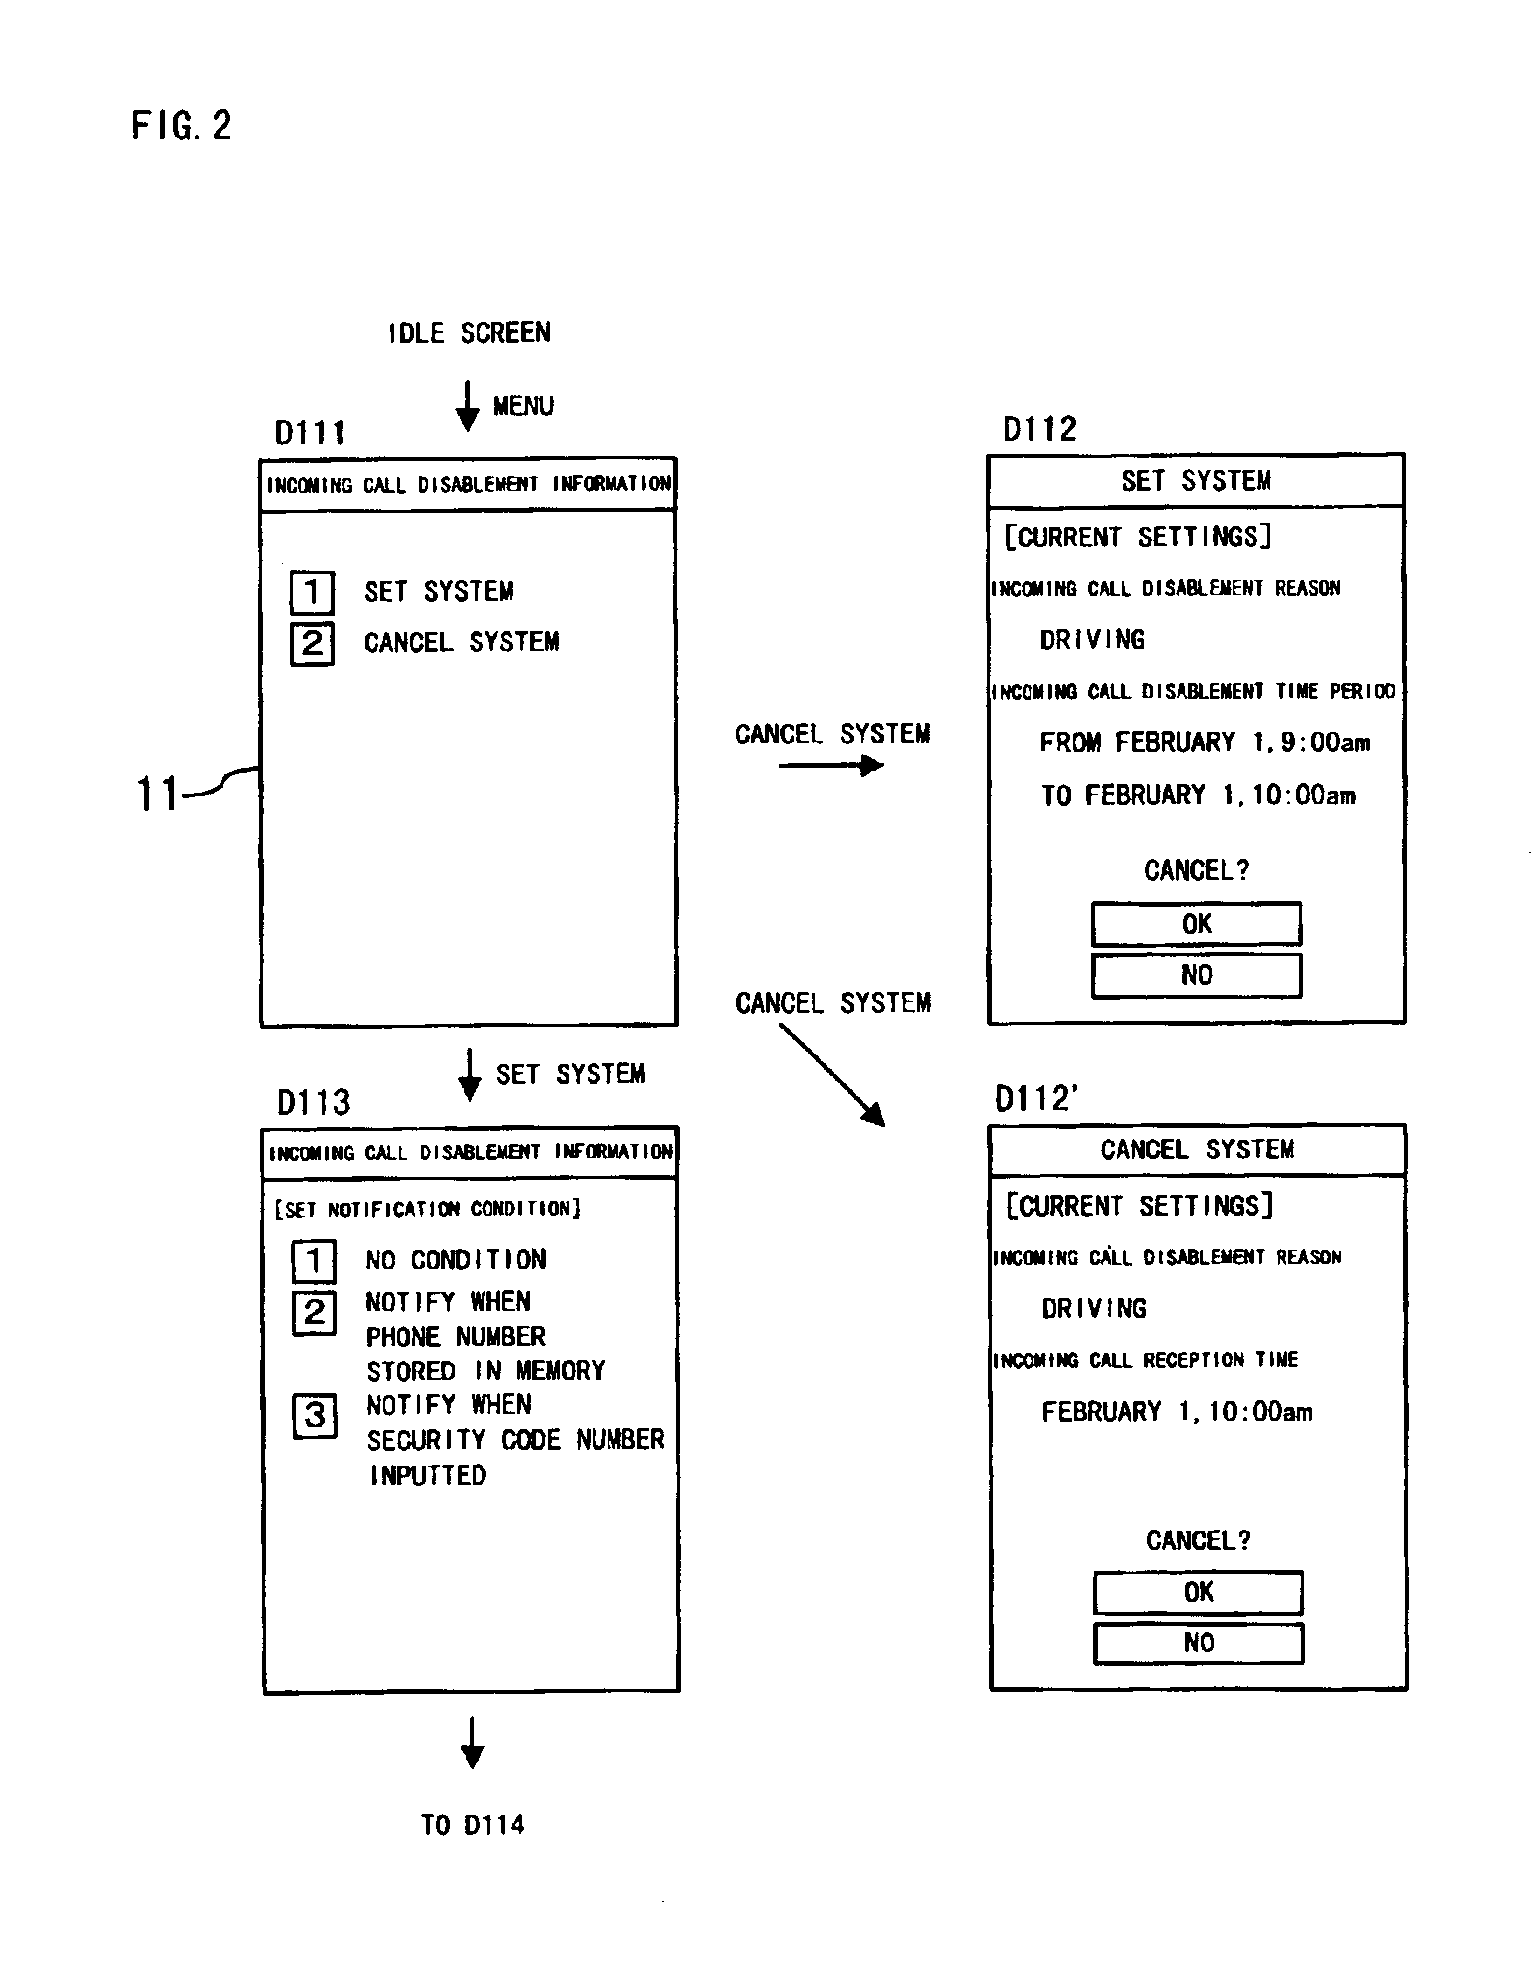 Call reception infeasibleness informing system and method